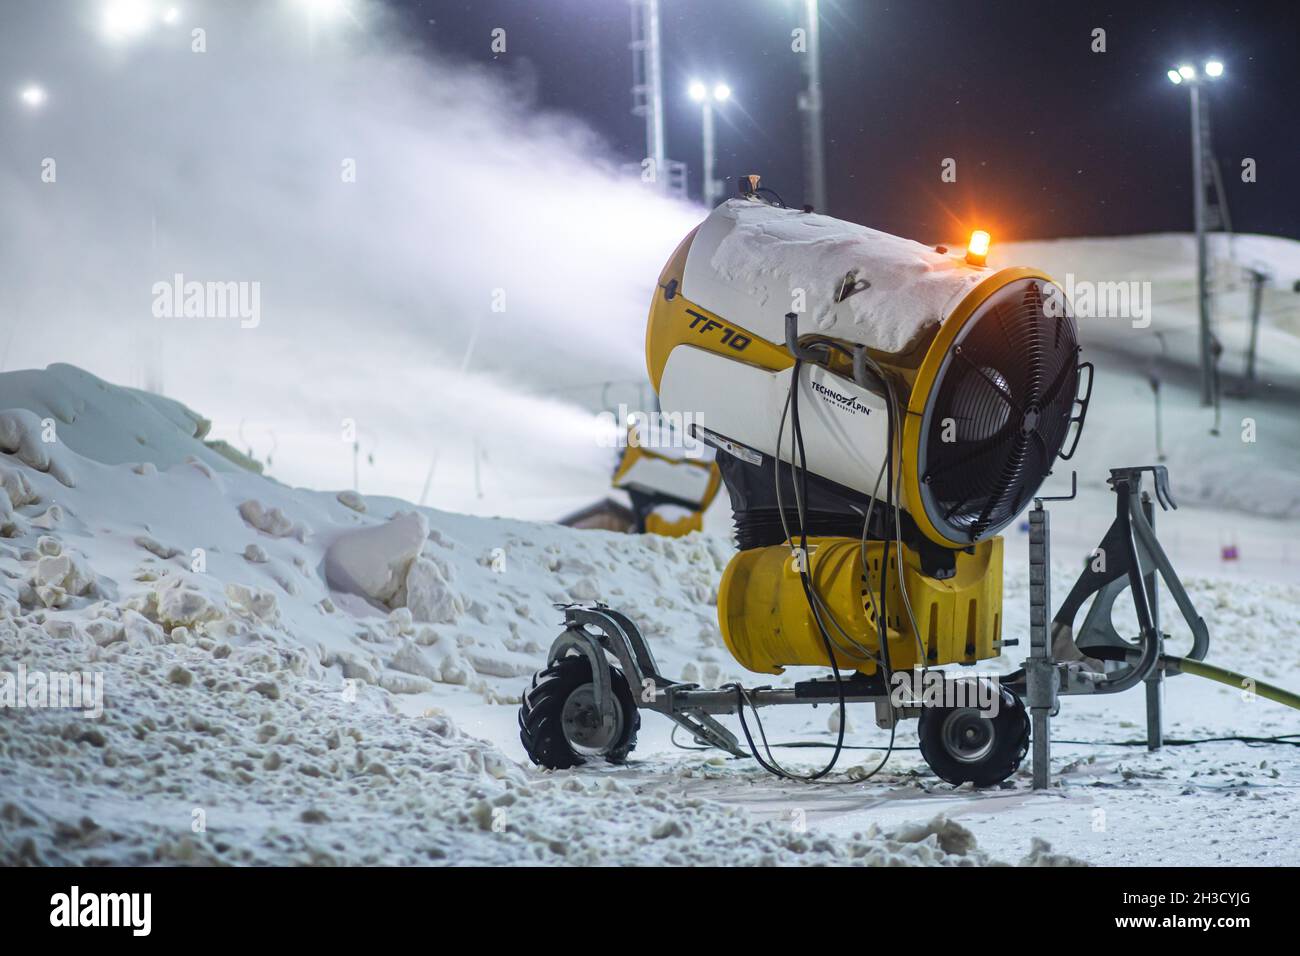 https://c8.alamy.com/comp/2H3CYJG/snow-cannon-gun-artificial-snow-making-machine-on-the-slopes-of-a-ski-resort-ski-lift-and-piste-2H3CYJG.jpg